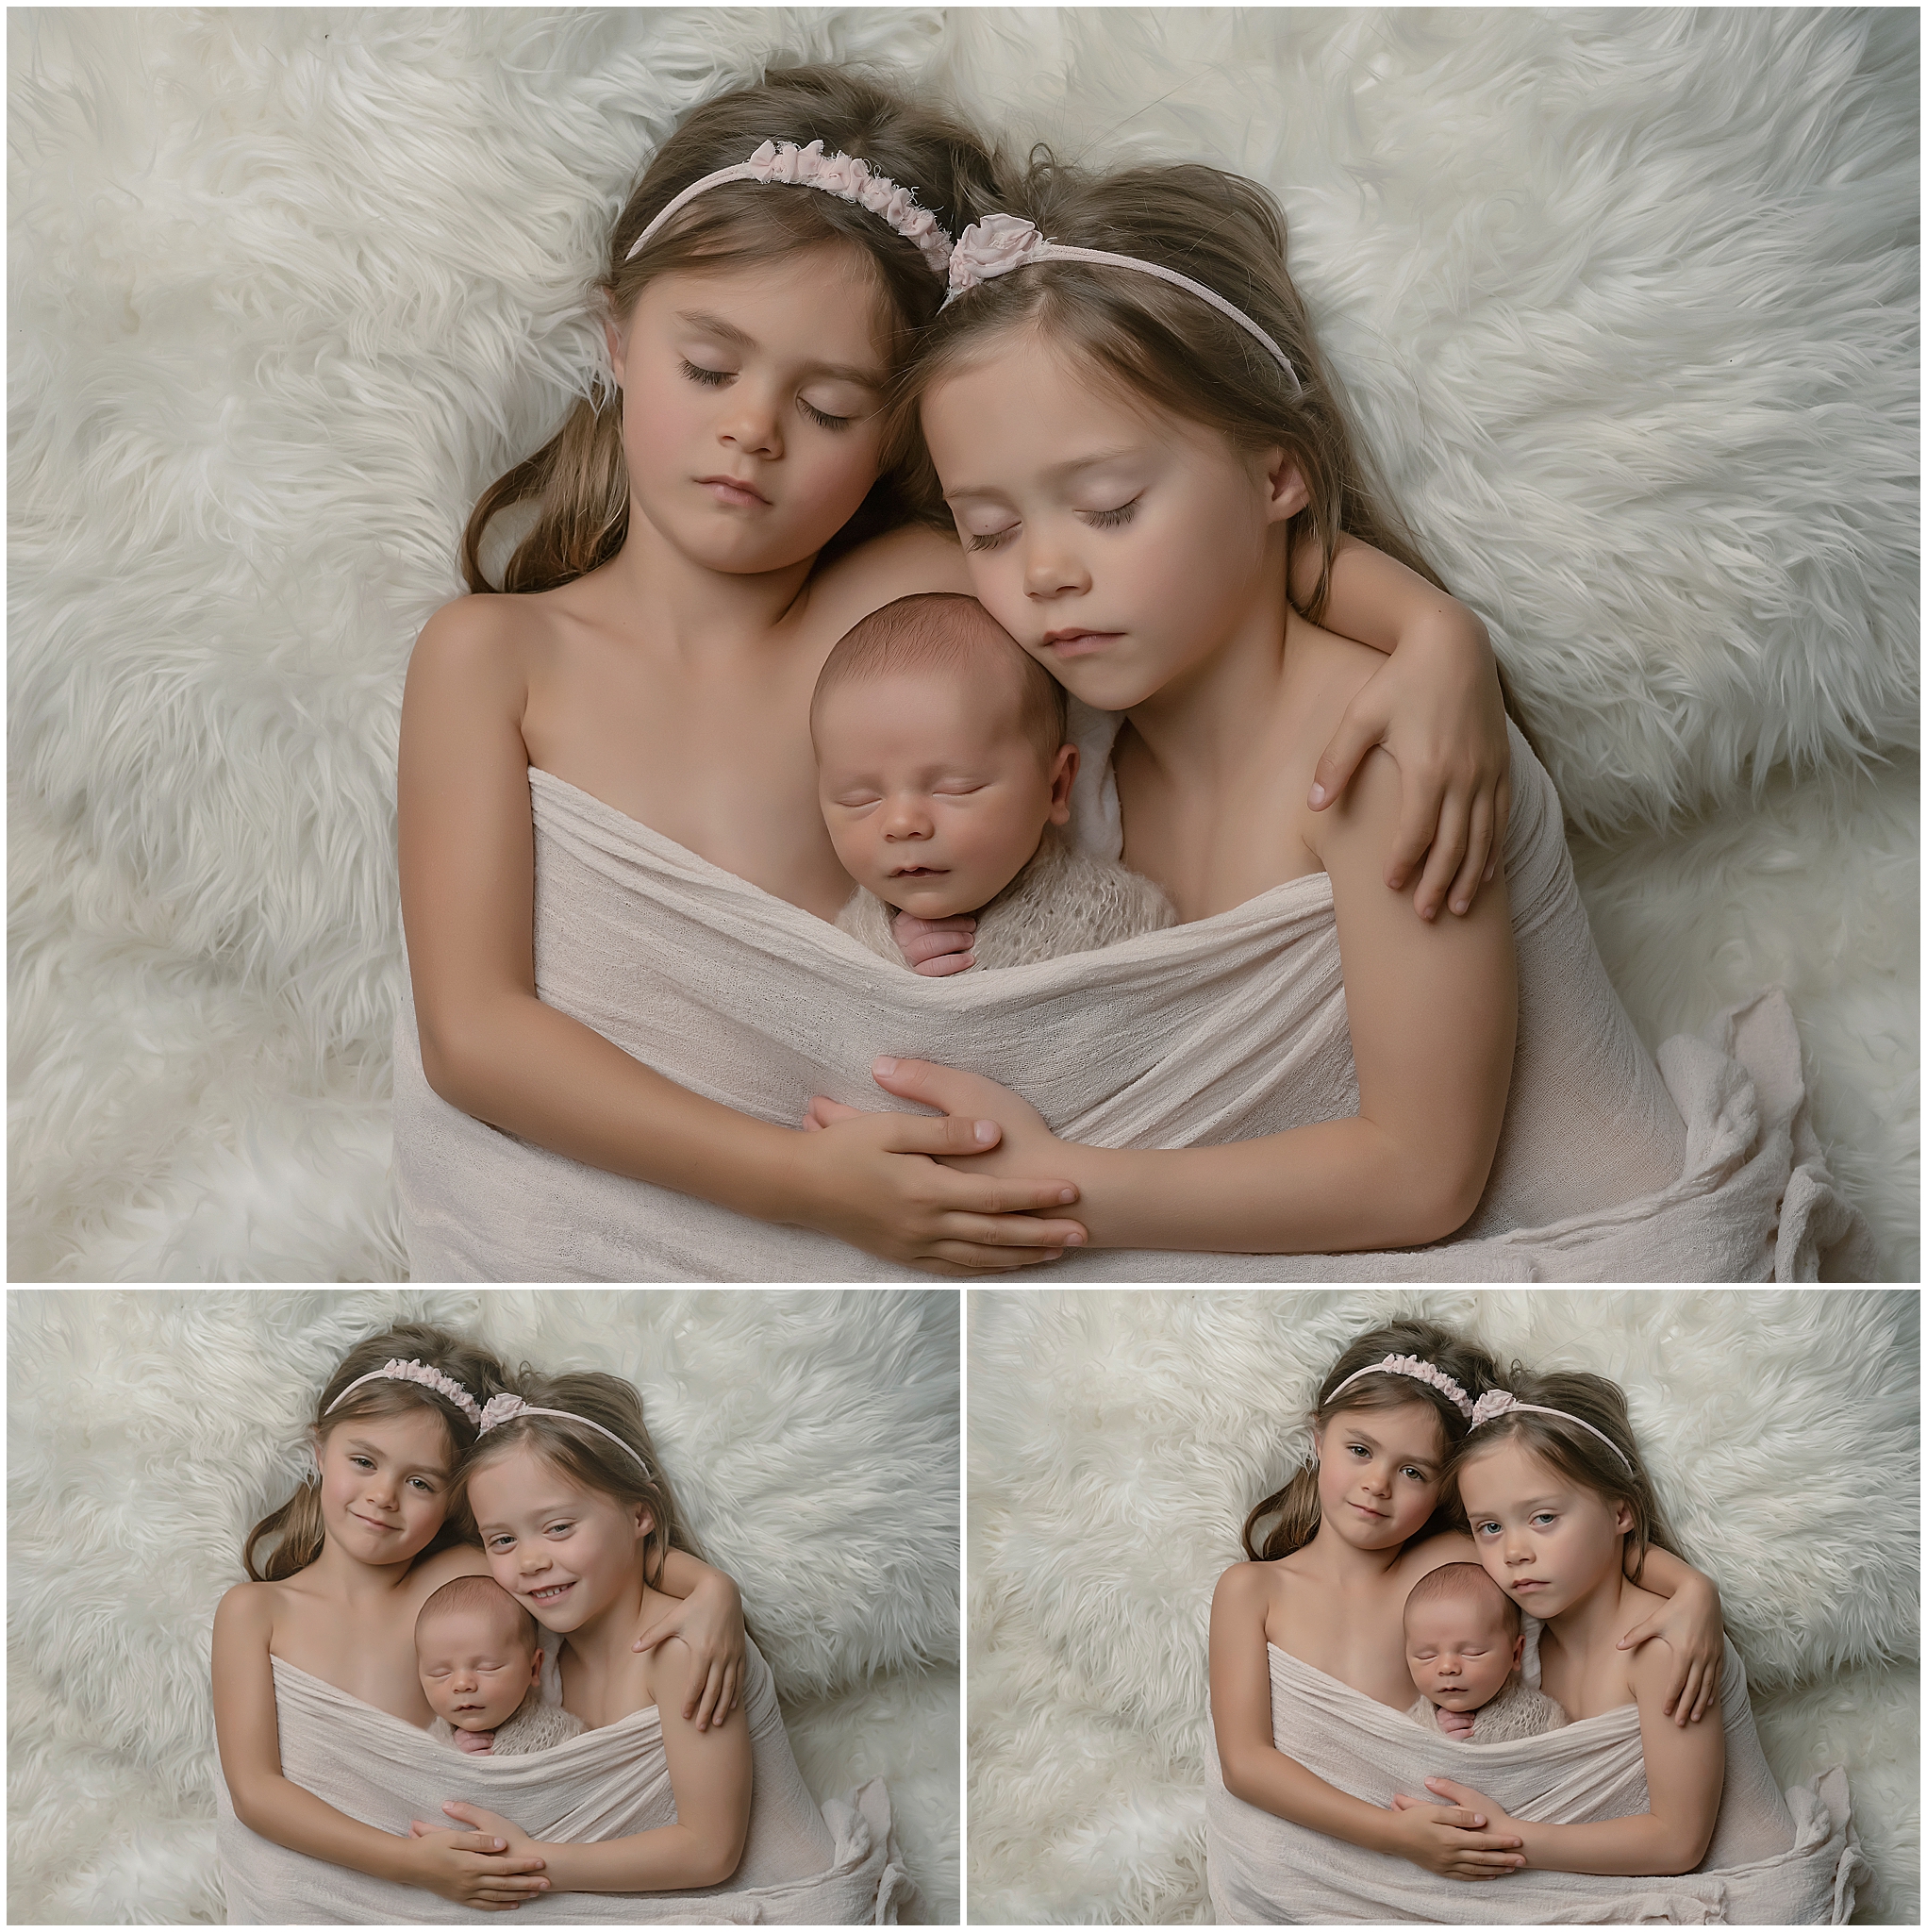 baby boy sleeping with sisters during baby boy sleeping in tiny bed during newborn photography session at studio in london ontario